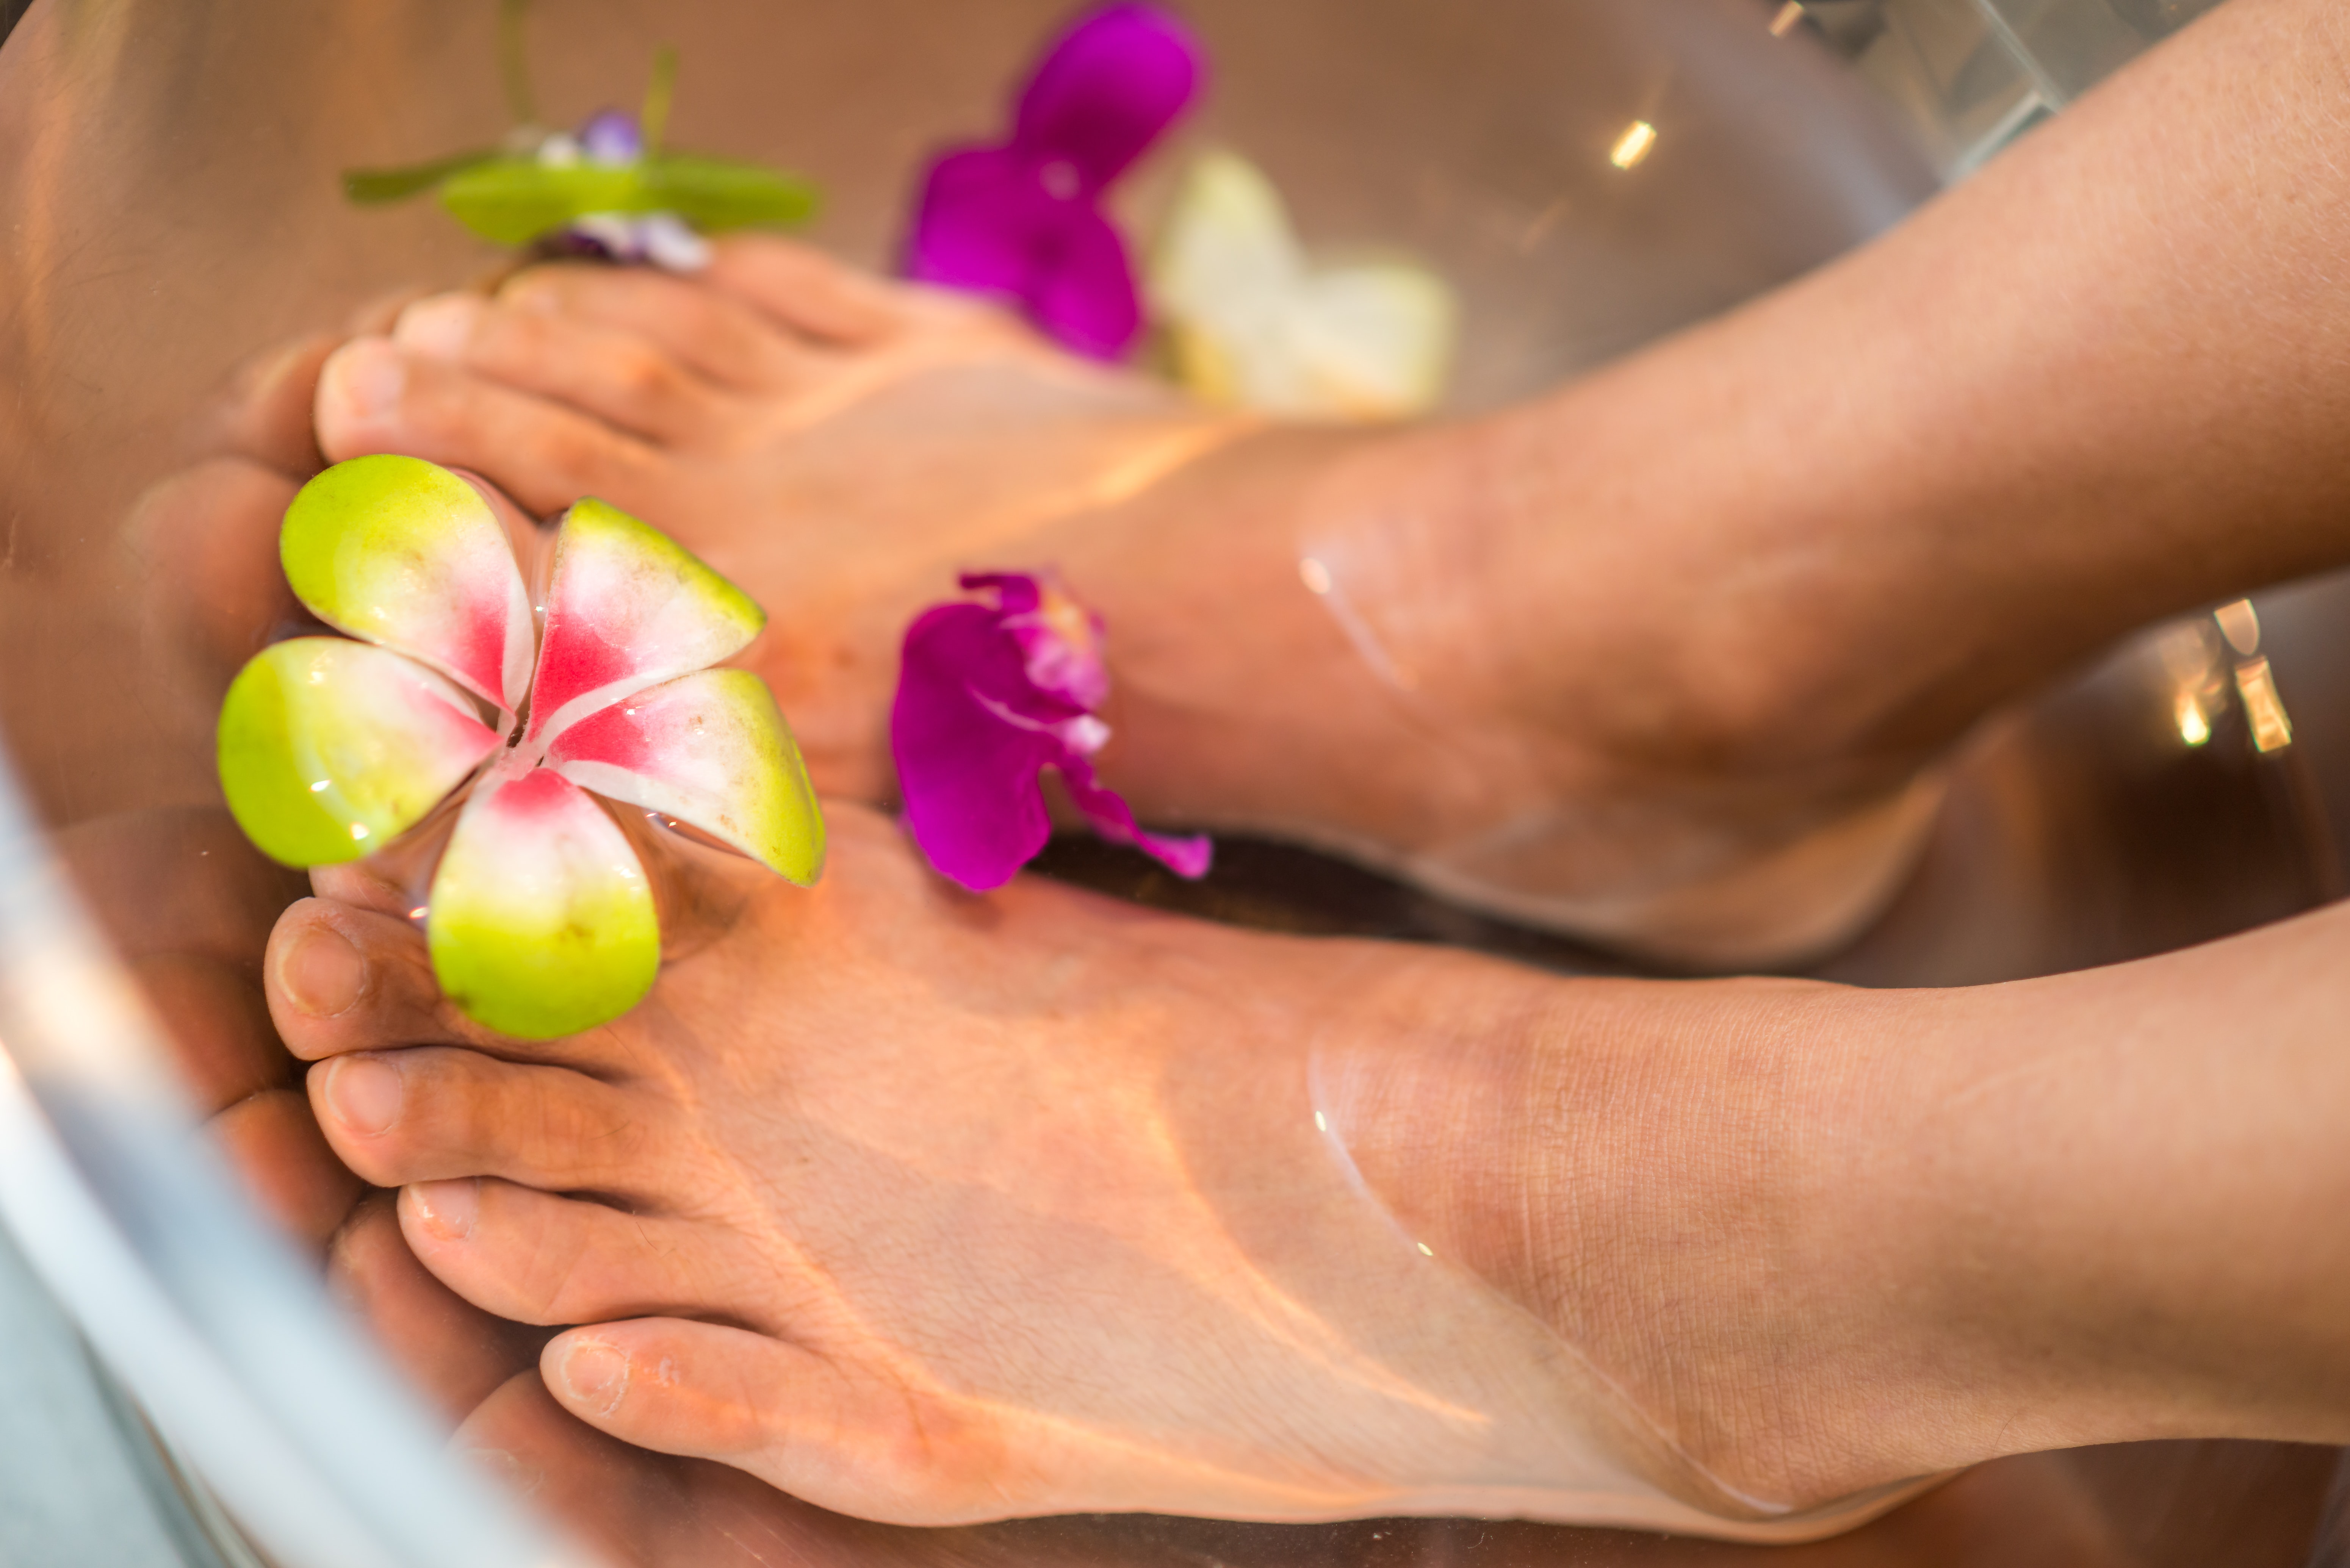 Feet in a basin of water with flowers.